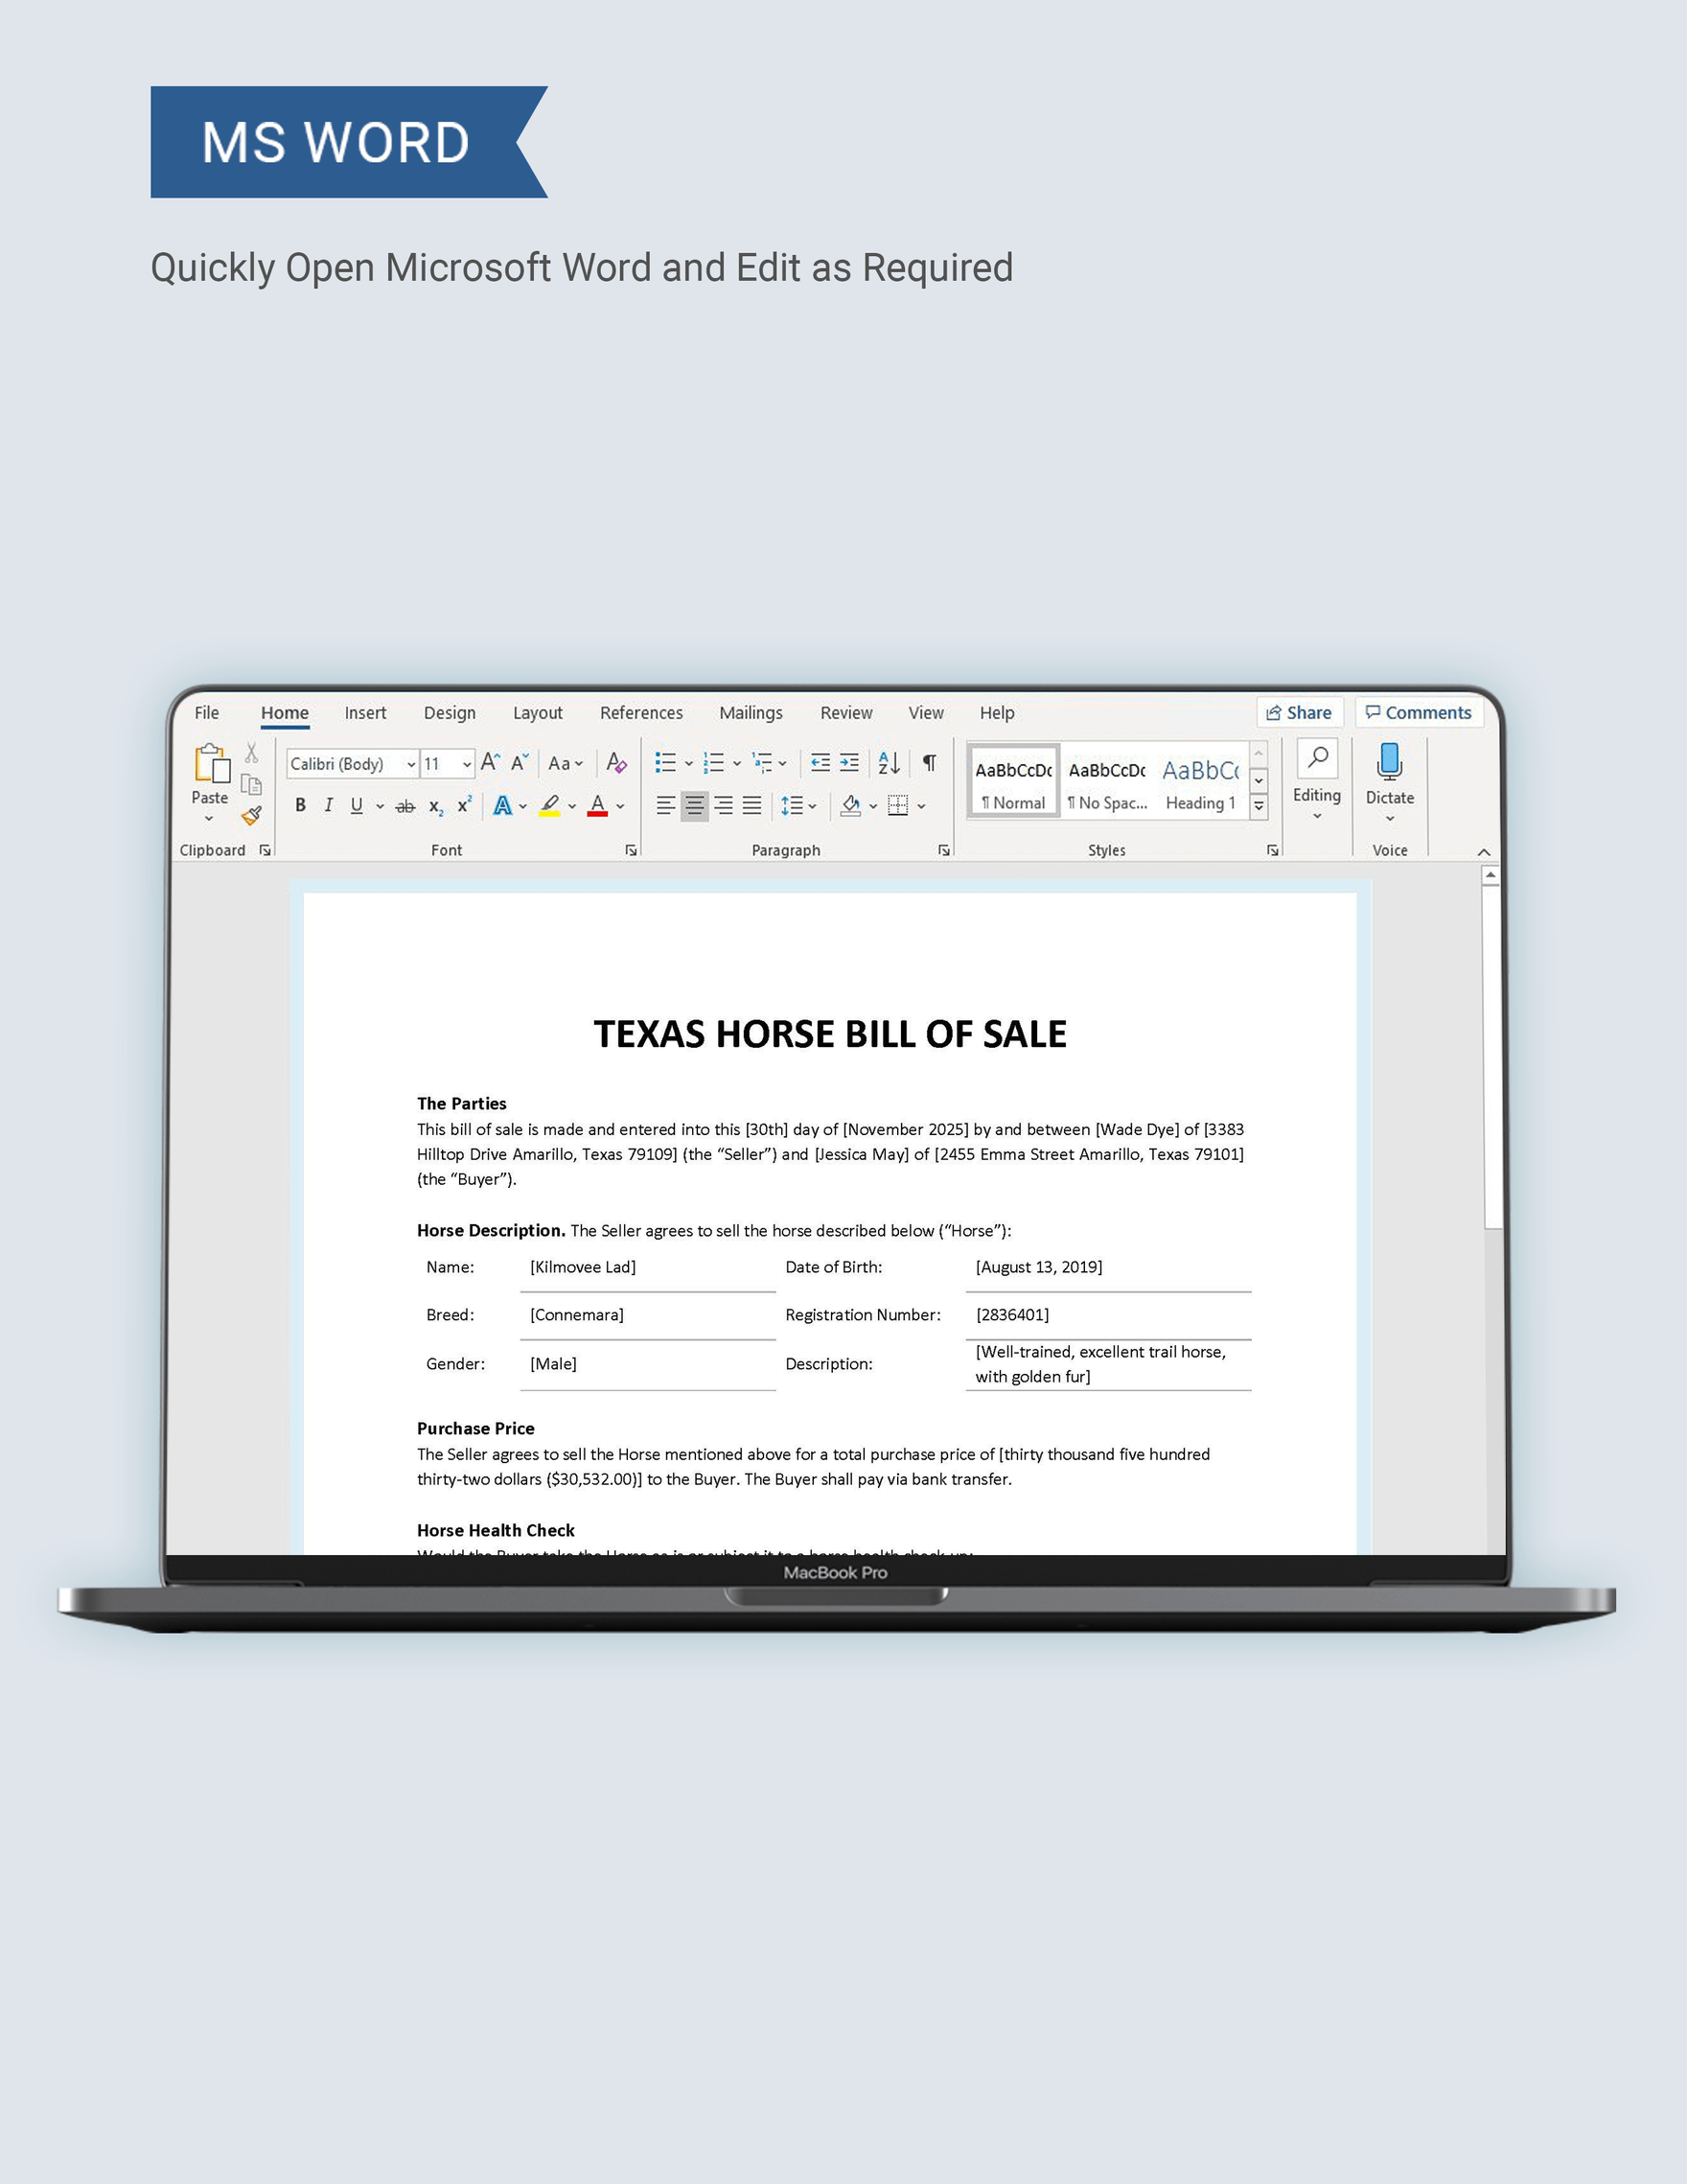 Texas Horse Bill of Sale Template